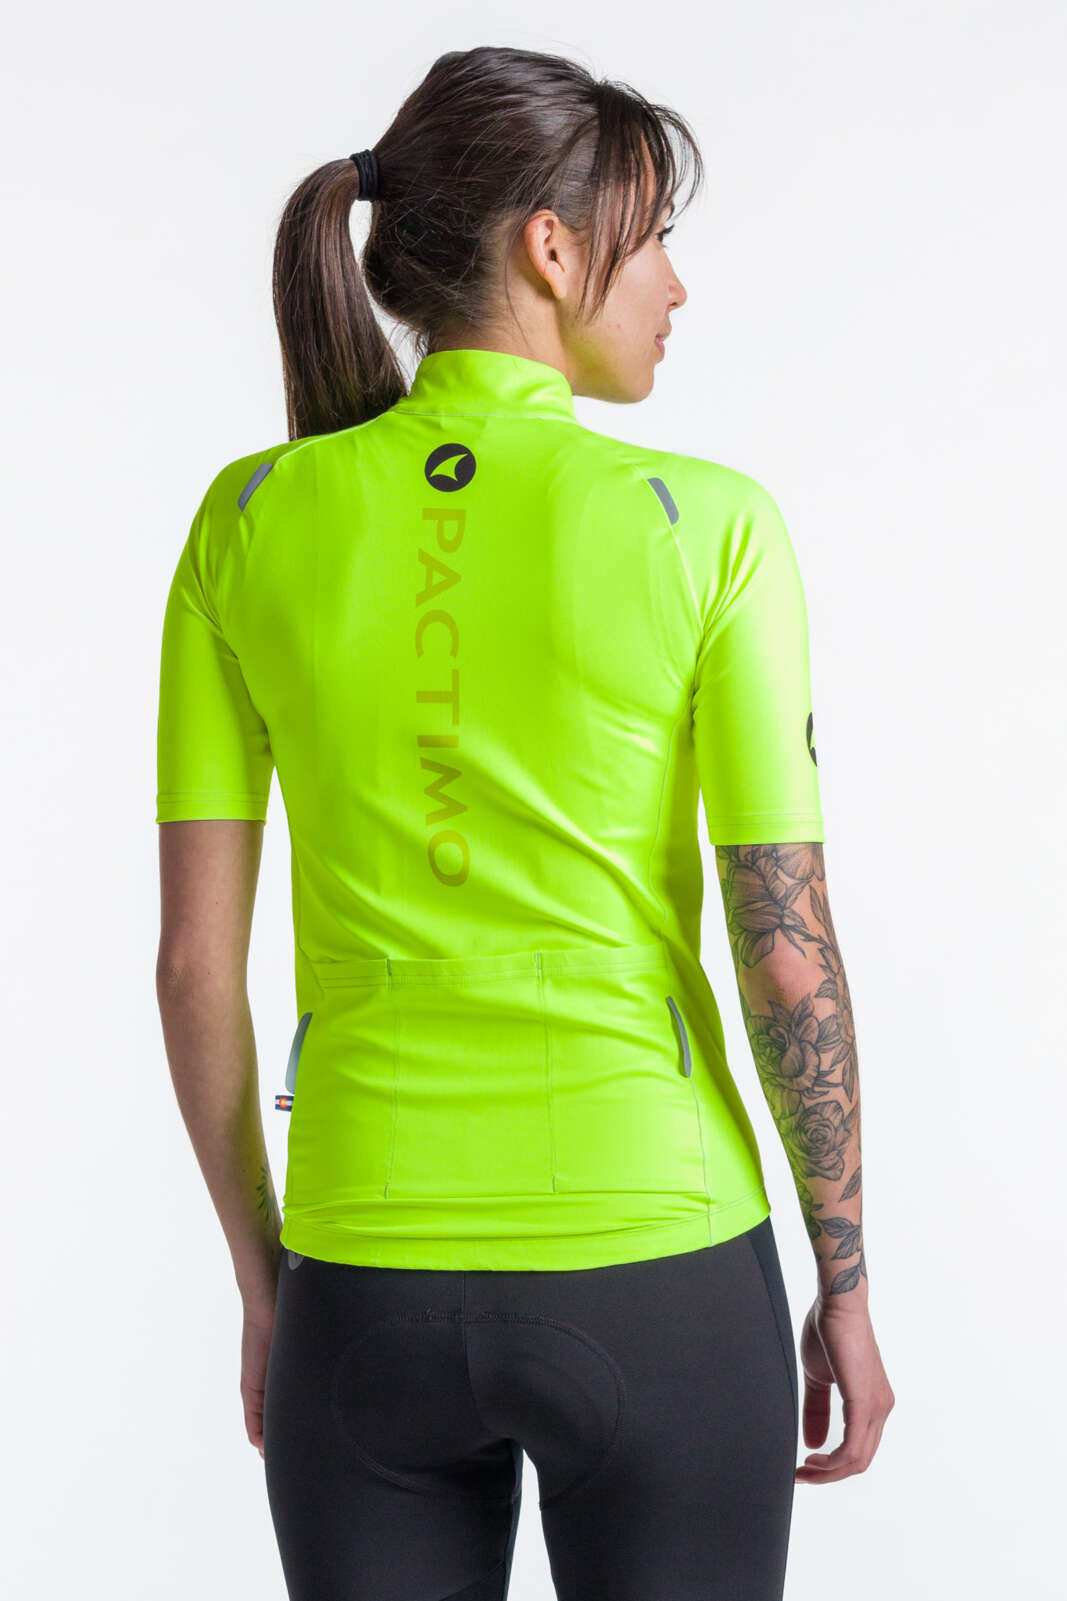 Women's High-Viz Yellow Water-Repelling Cycling Jersey - Back View